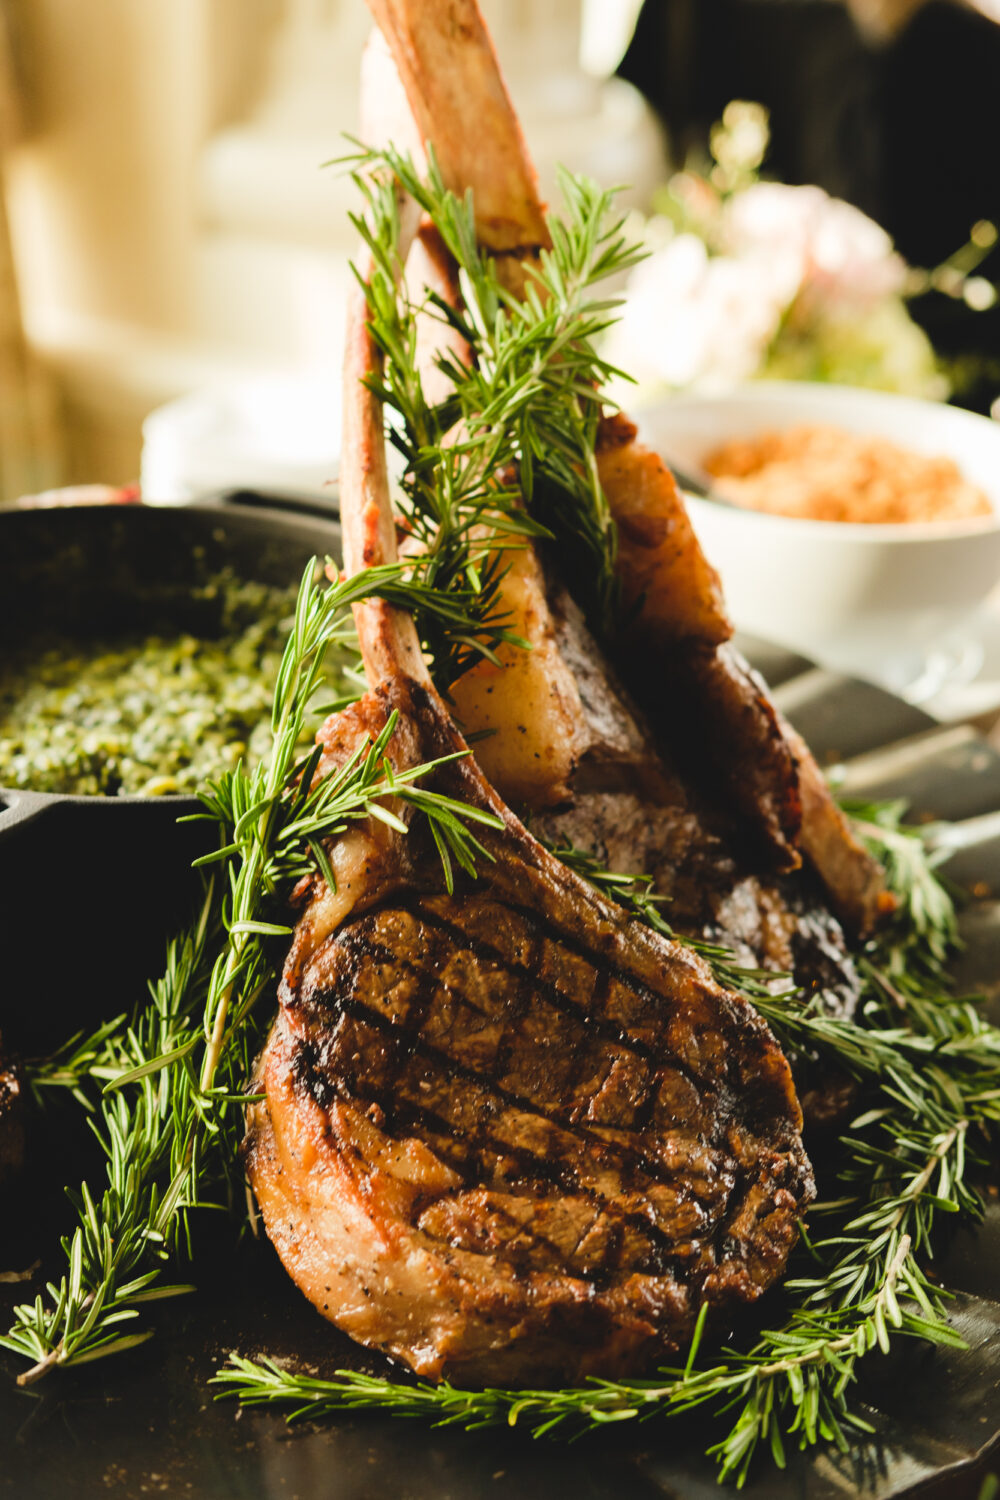 A plate of grilled lamb chops with rosemary sprigs.